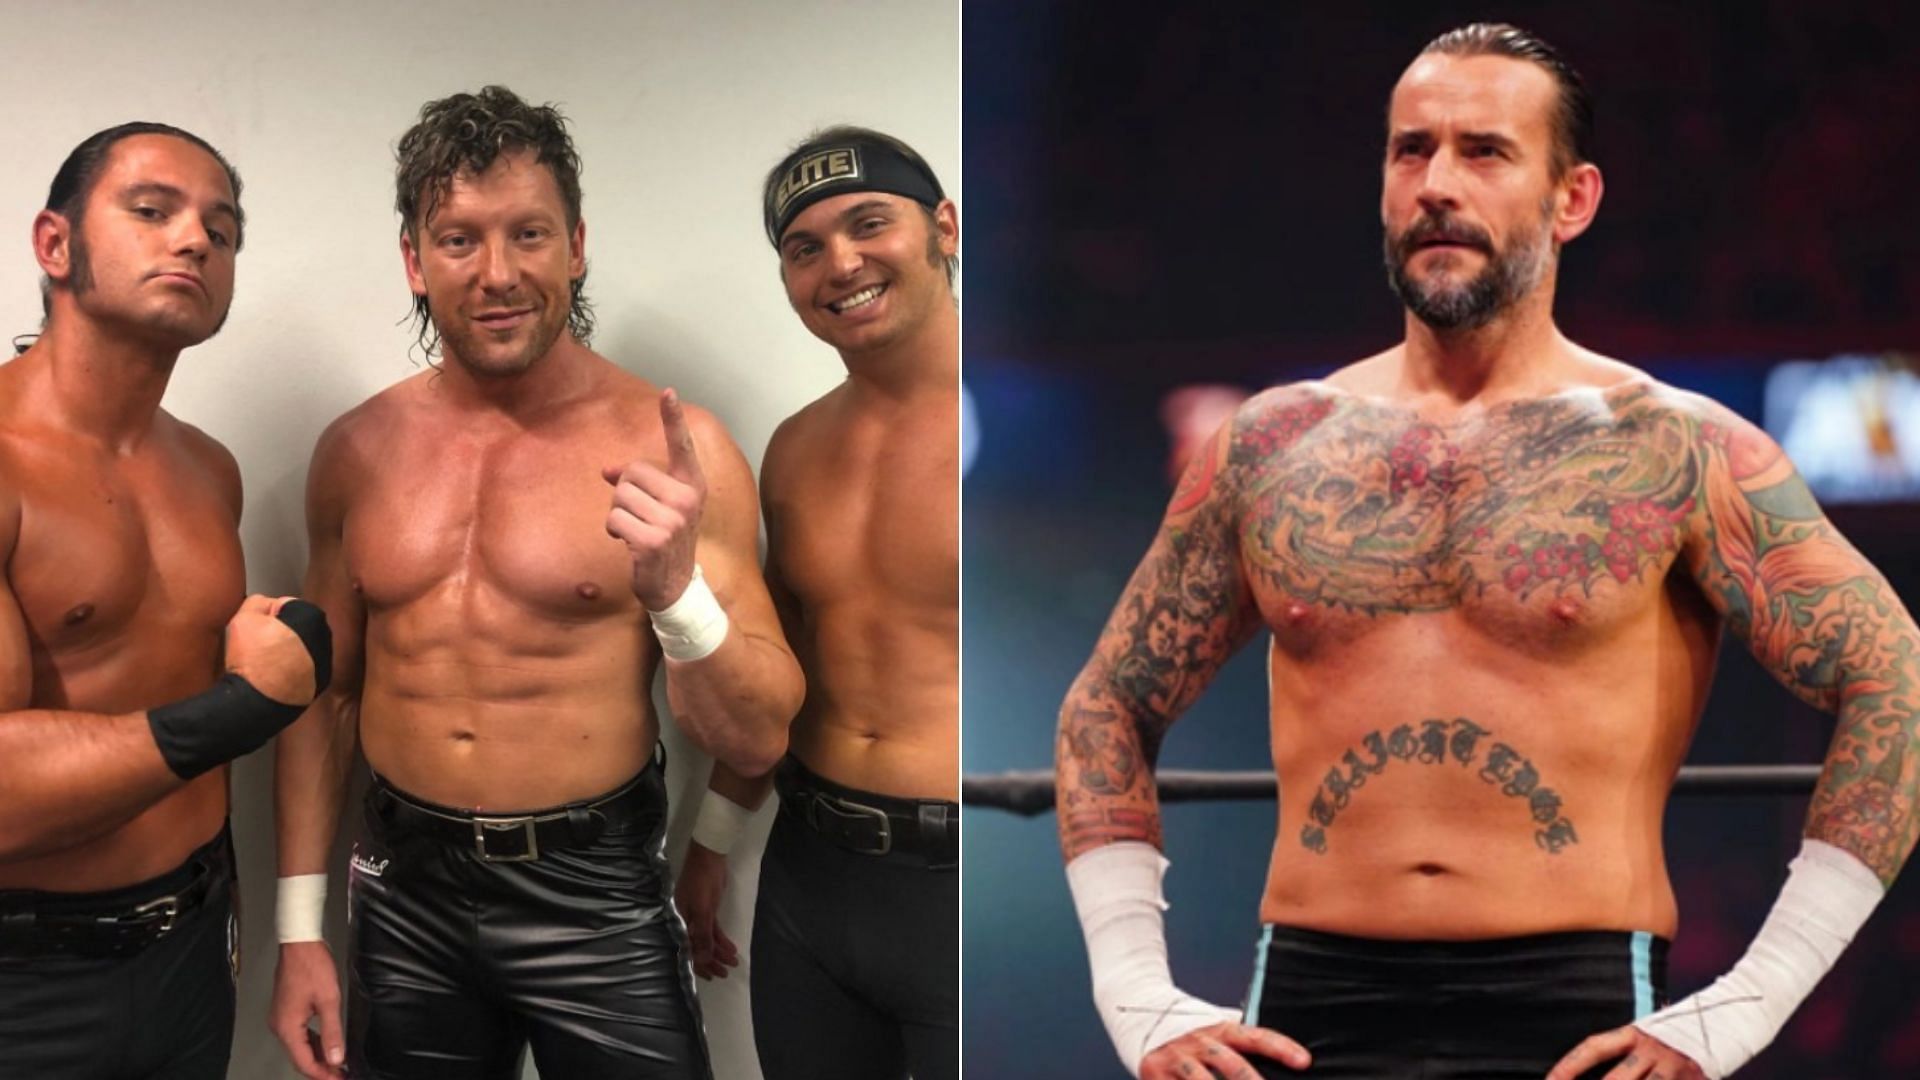 The Elite and CM Punk came to blows recently